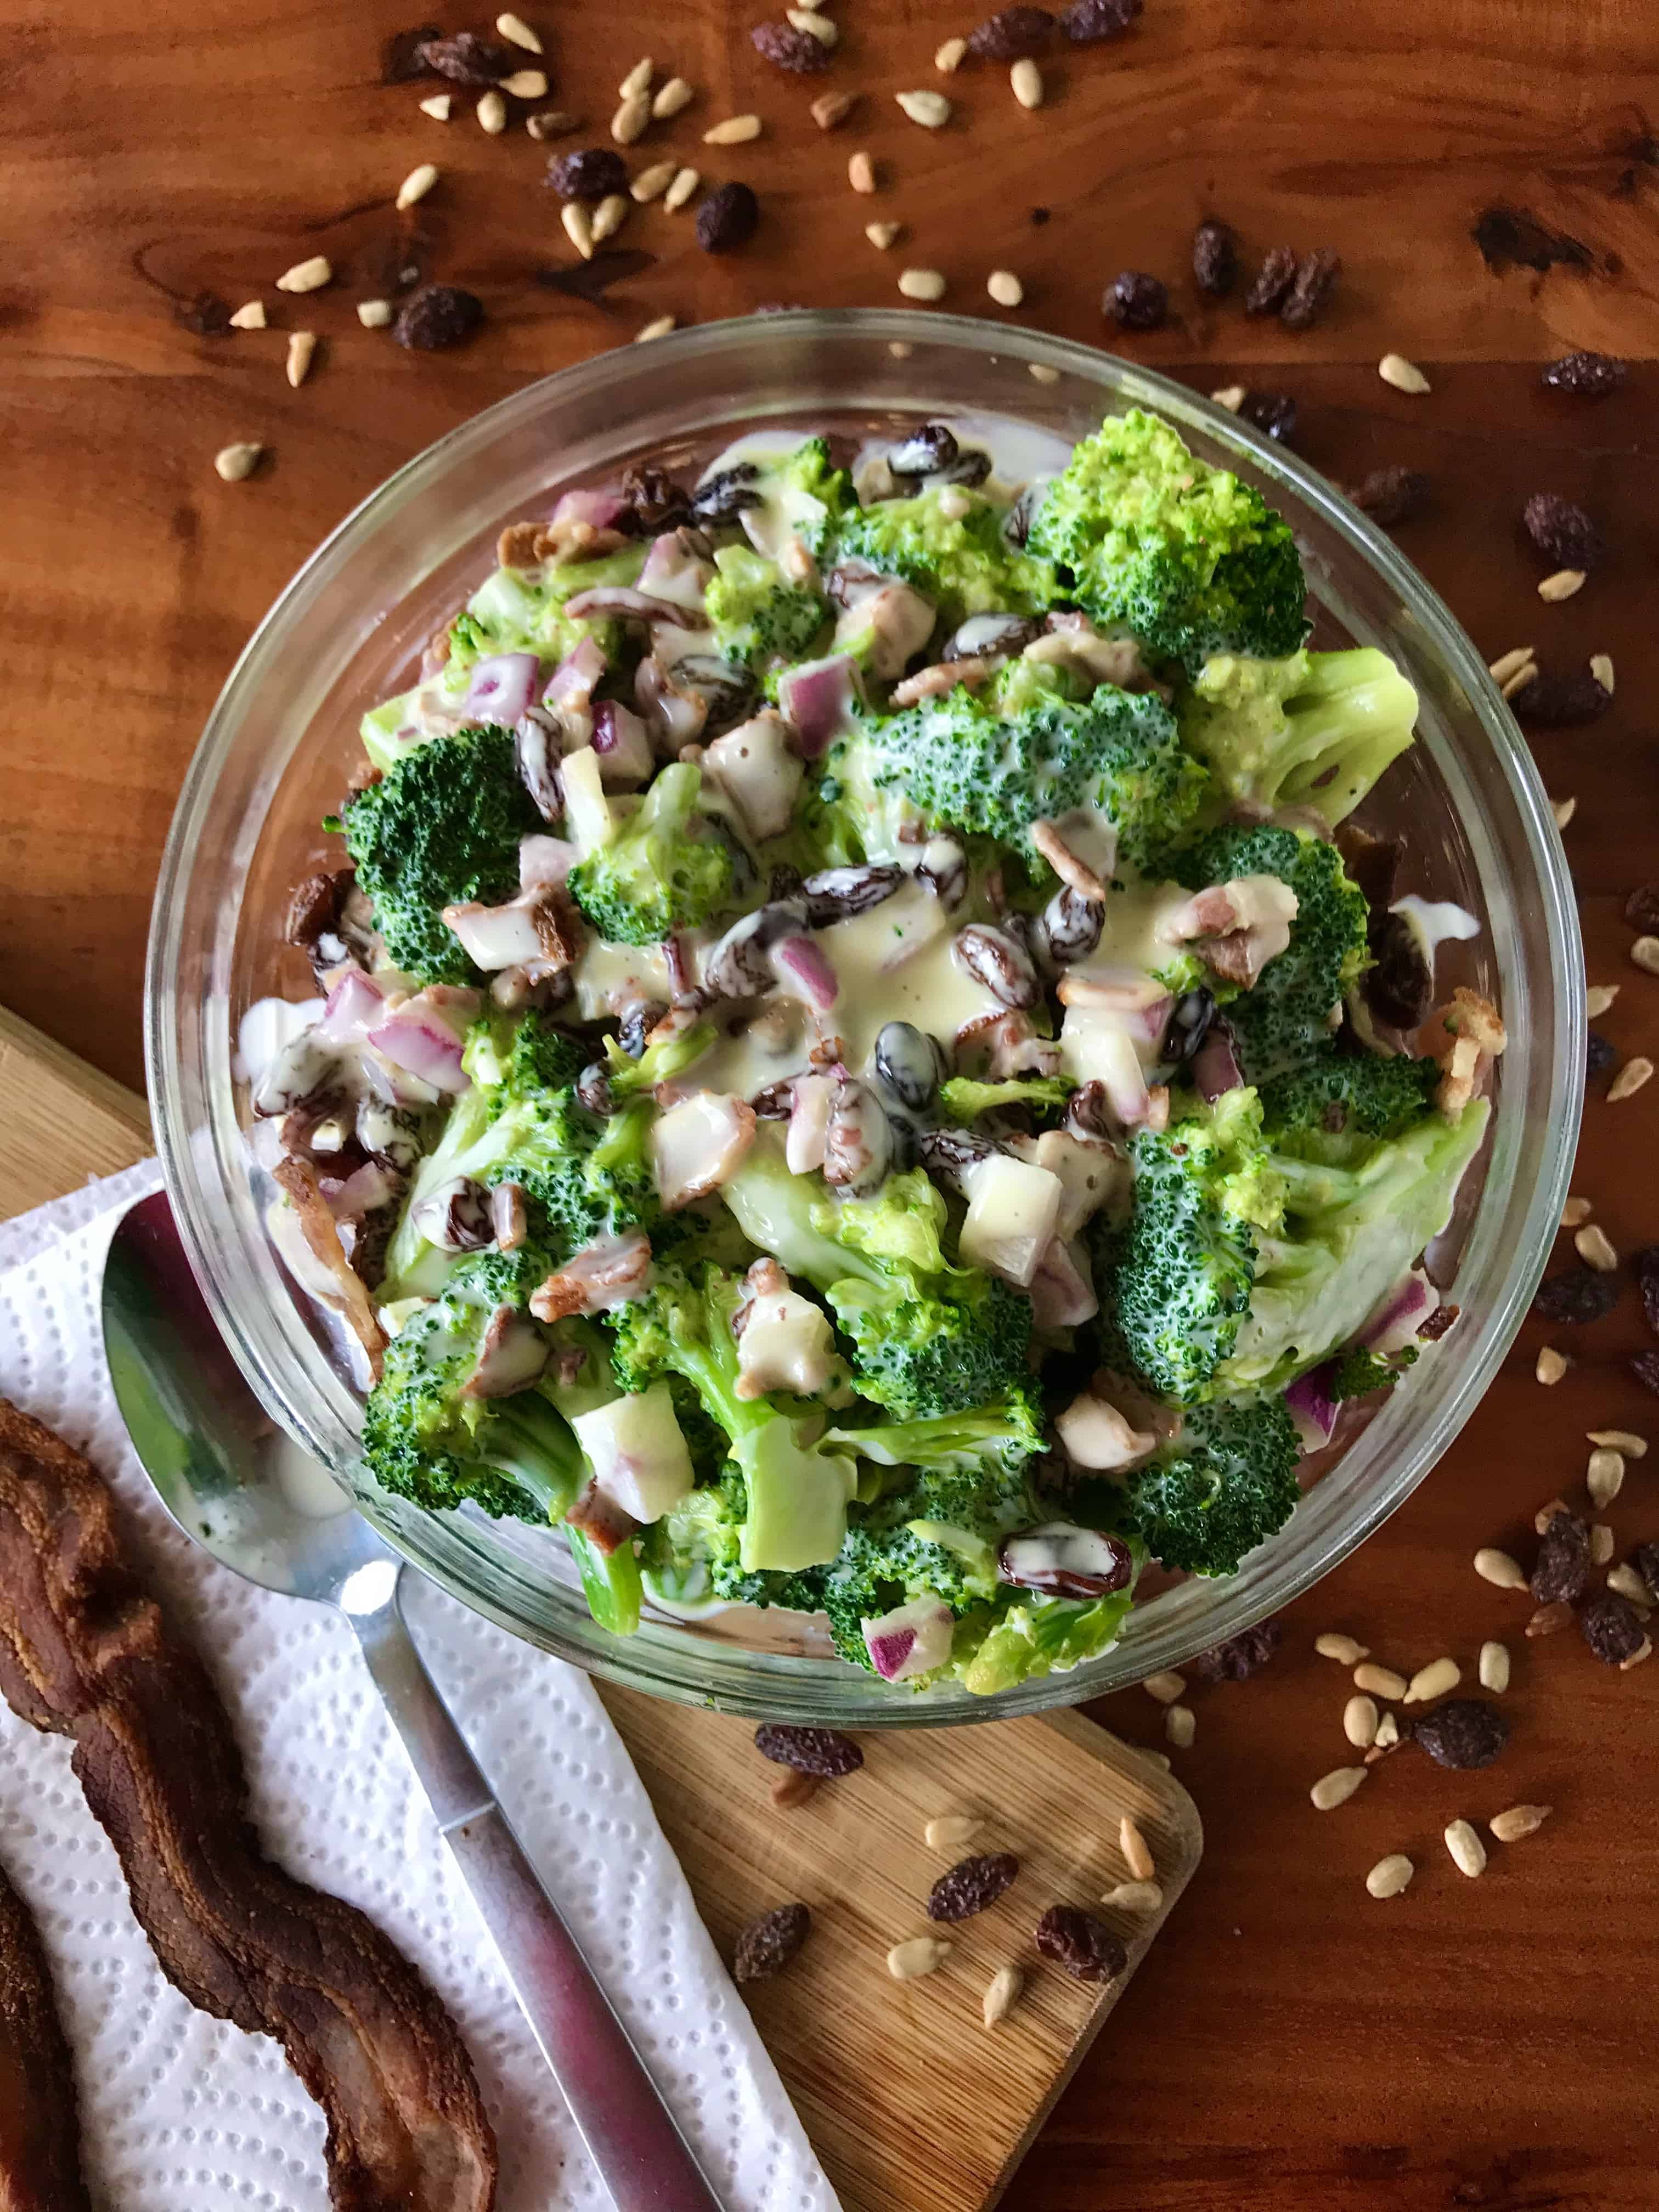 dairy free broccoli salad surrounded by raisins, sunflower seeds, a spoon and bacon